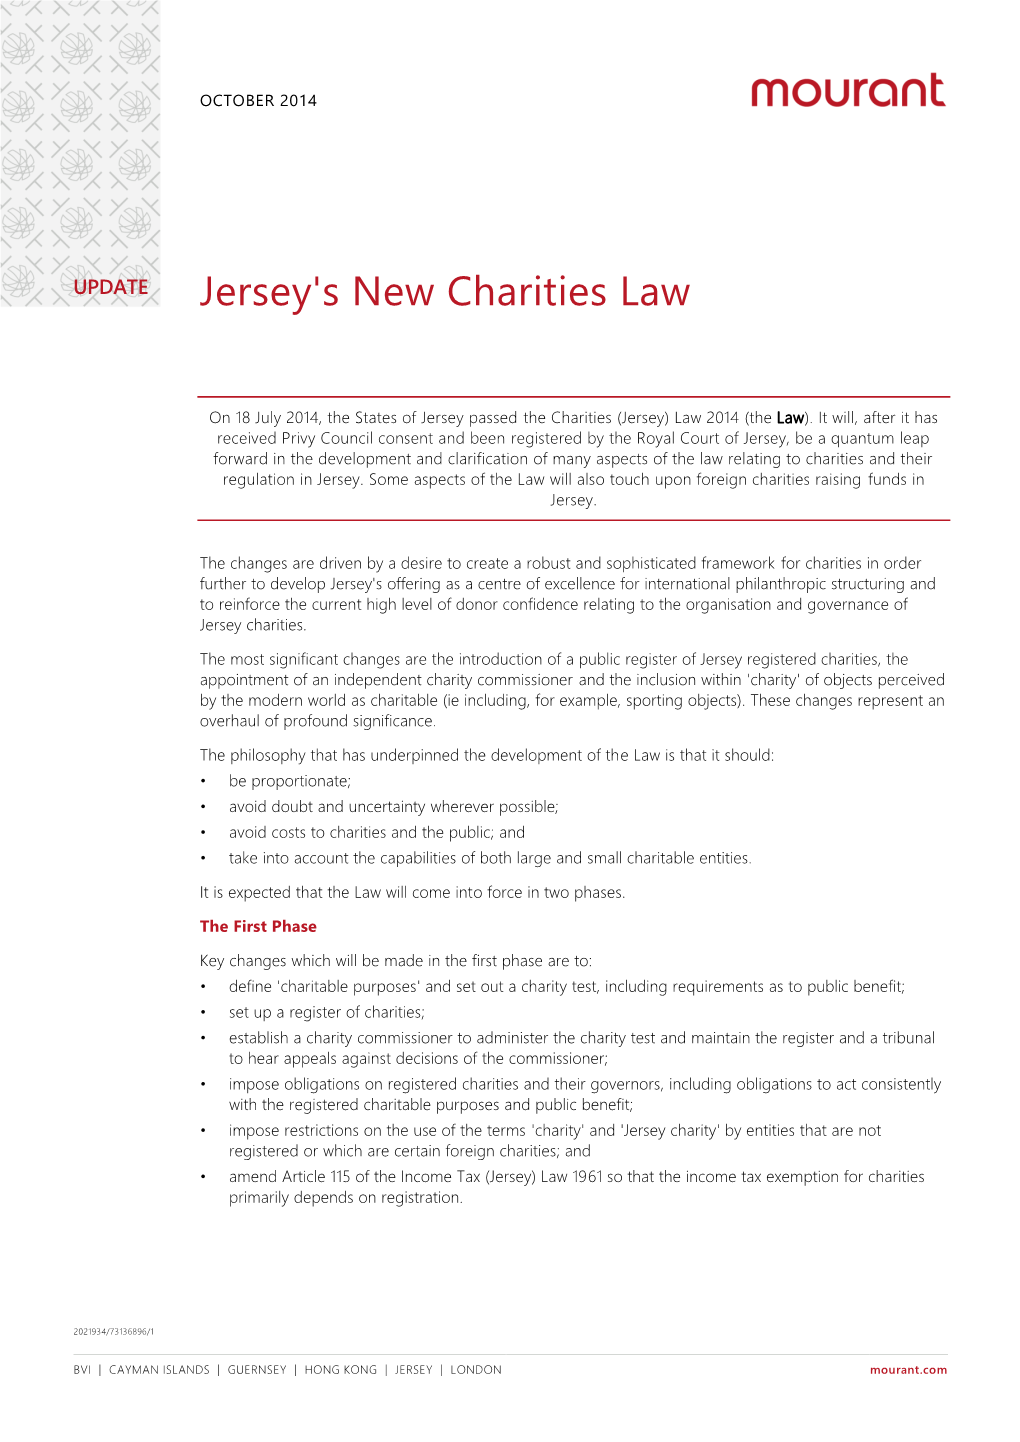 Jersey's New Charities Law